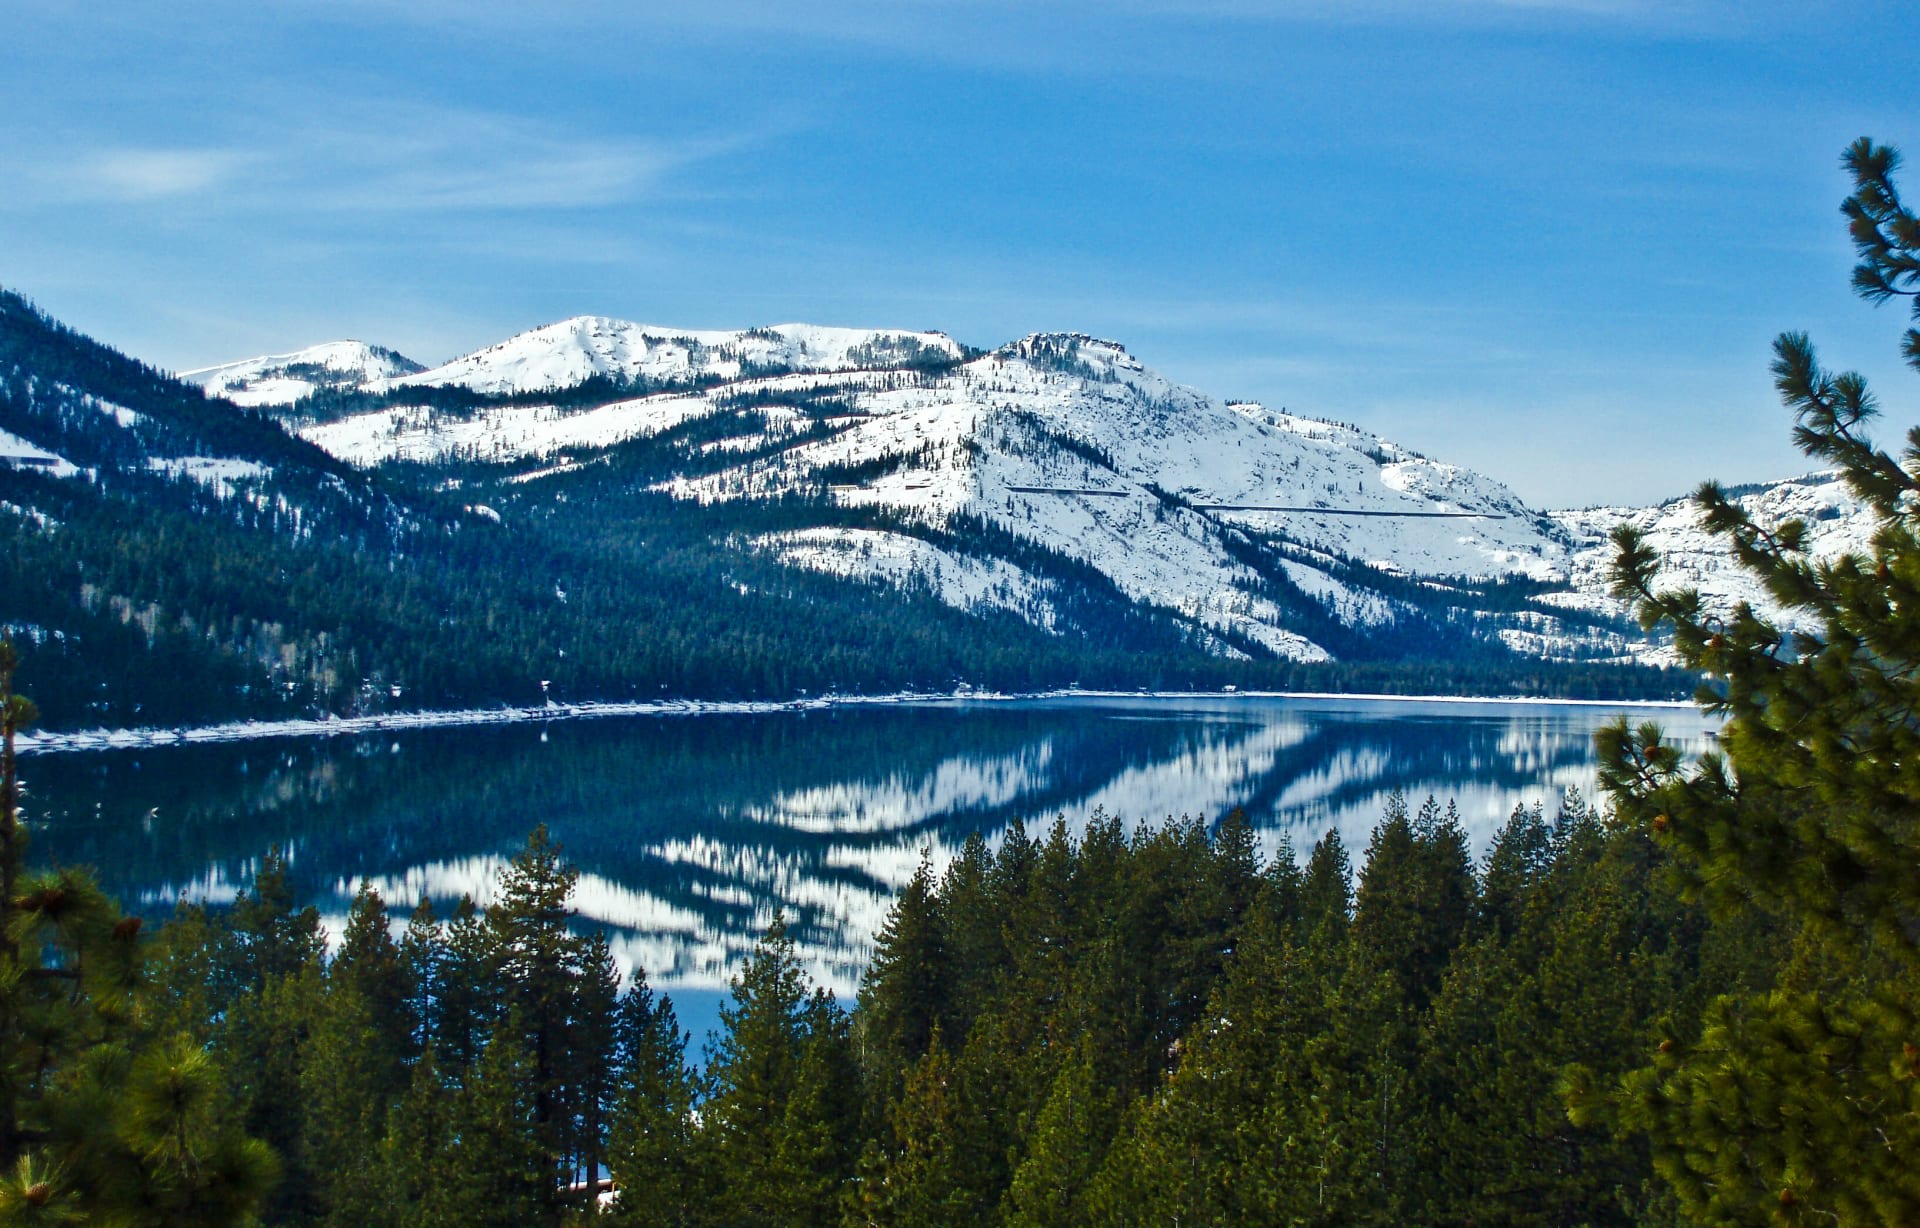 Donner Lake Reflection in Winter